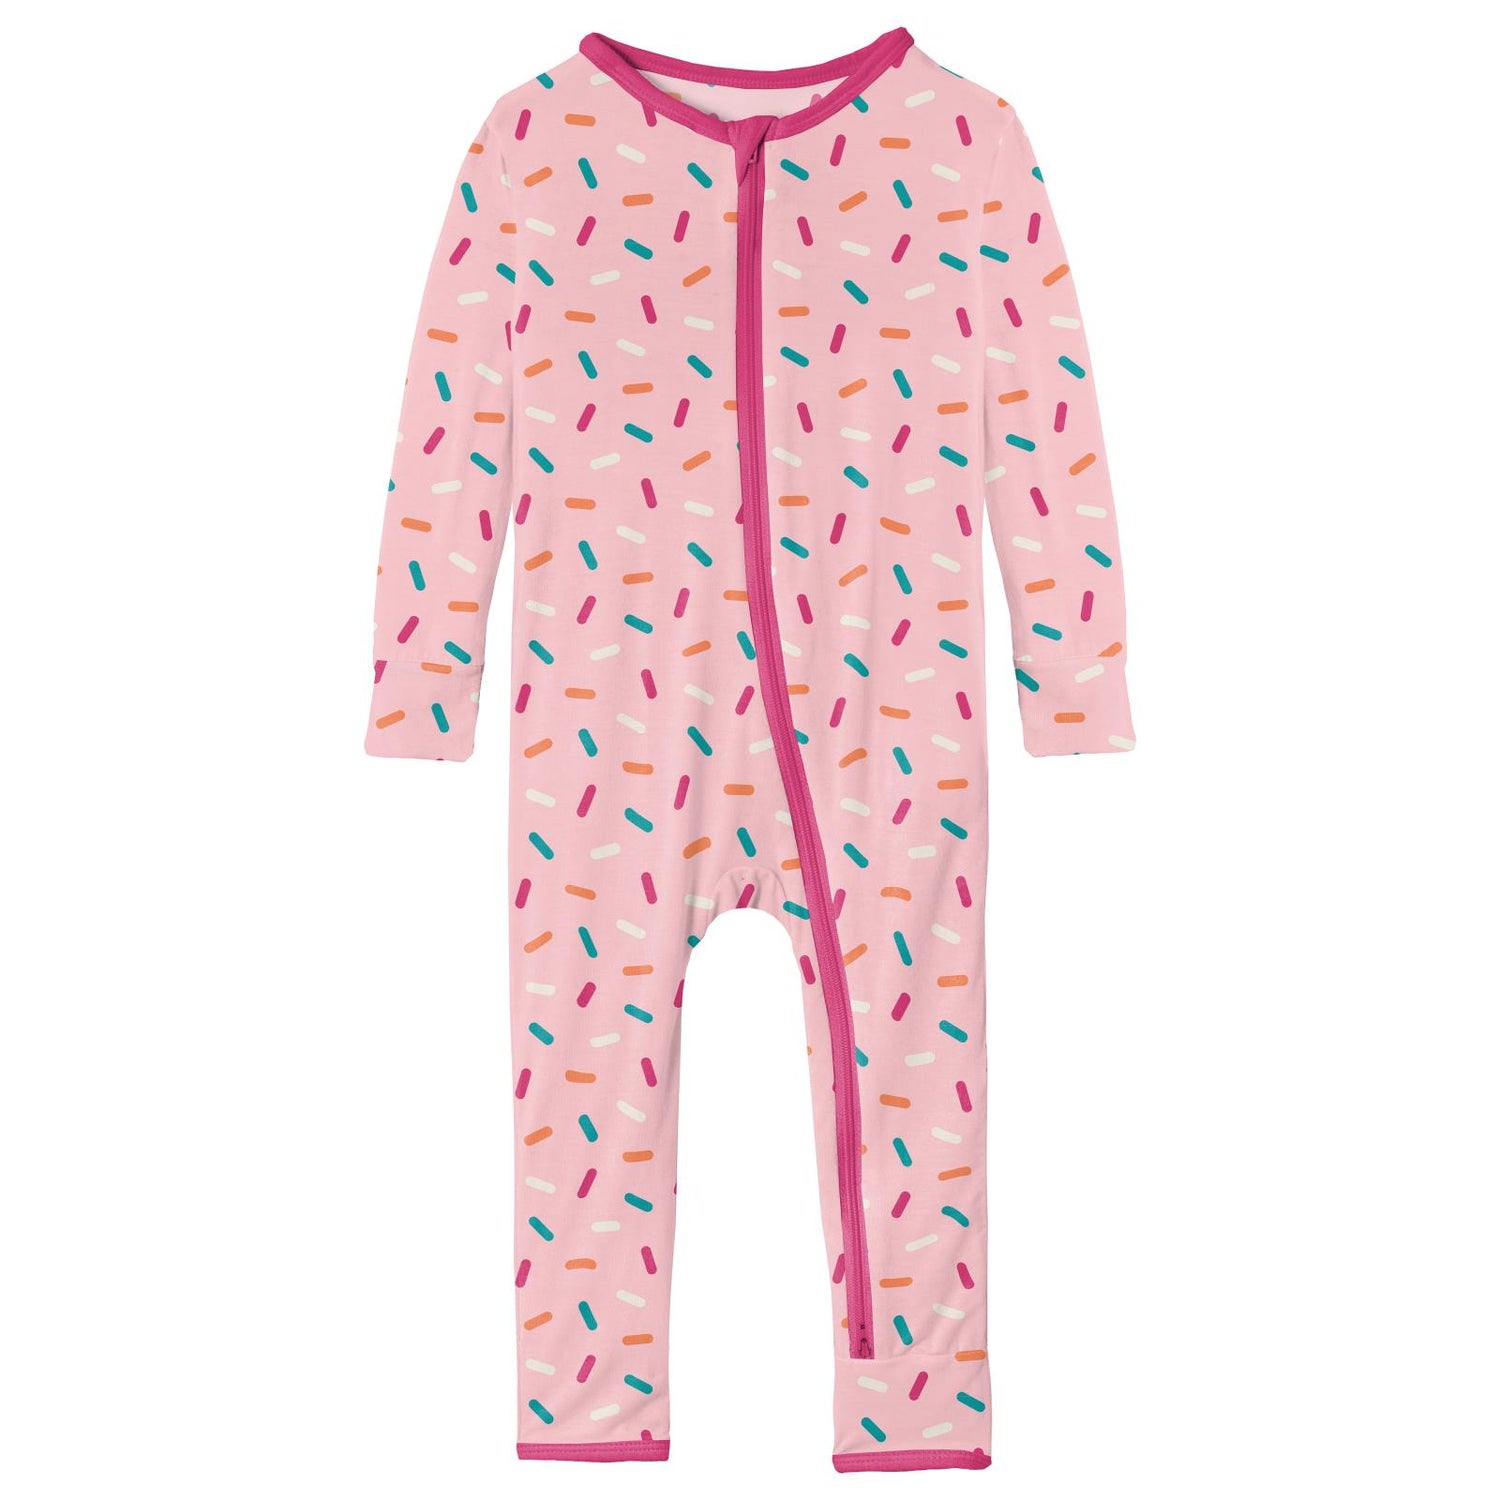 Print Coverall with 2 Way Zipper in Lotus Sprinkles